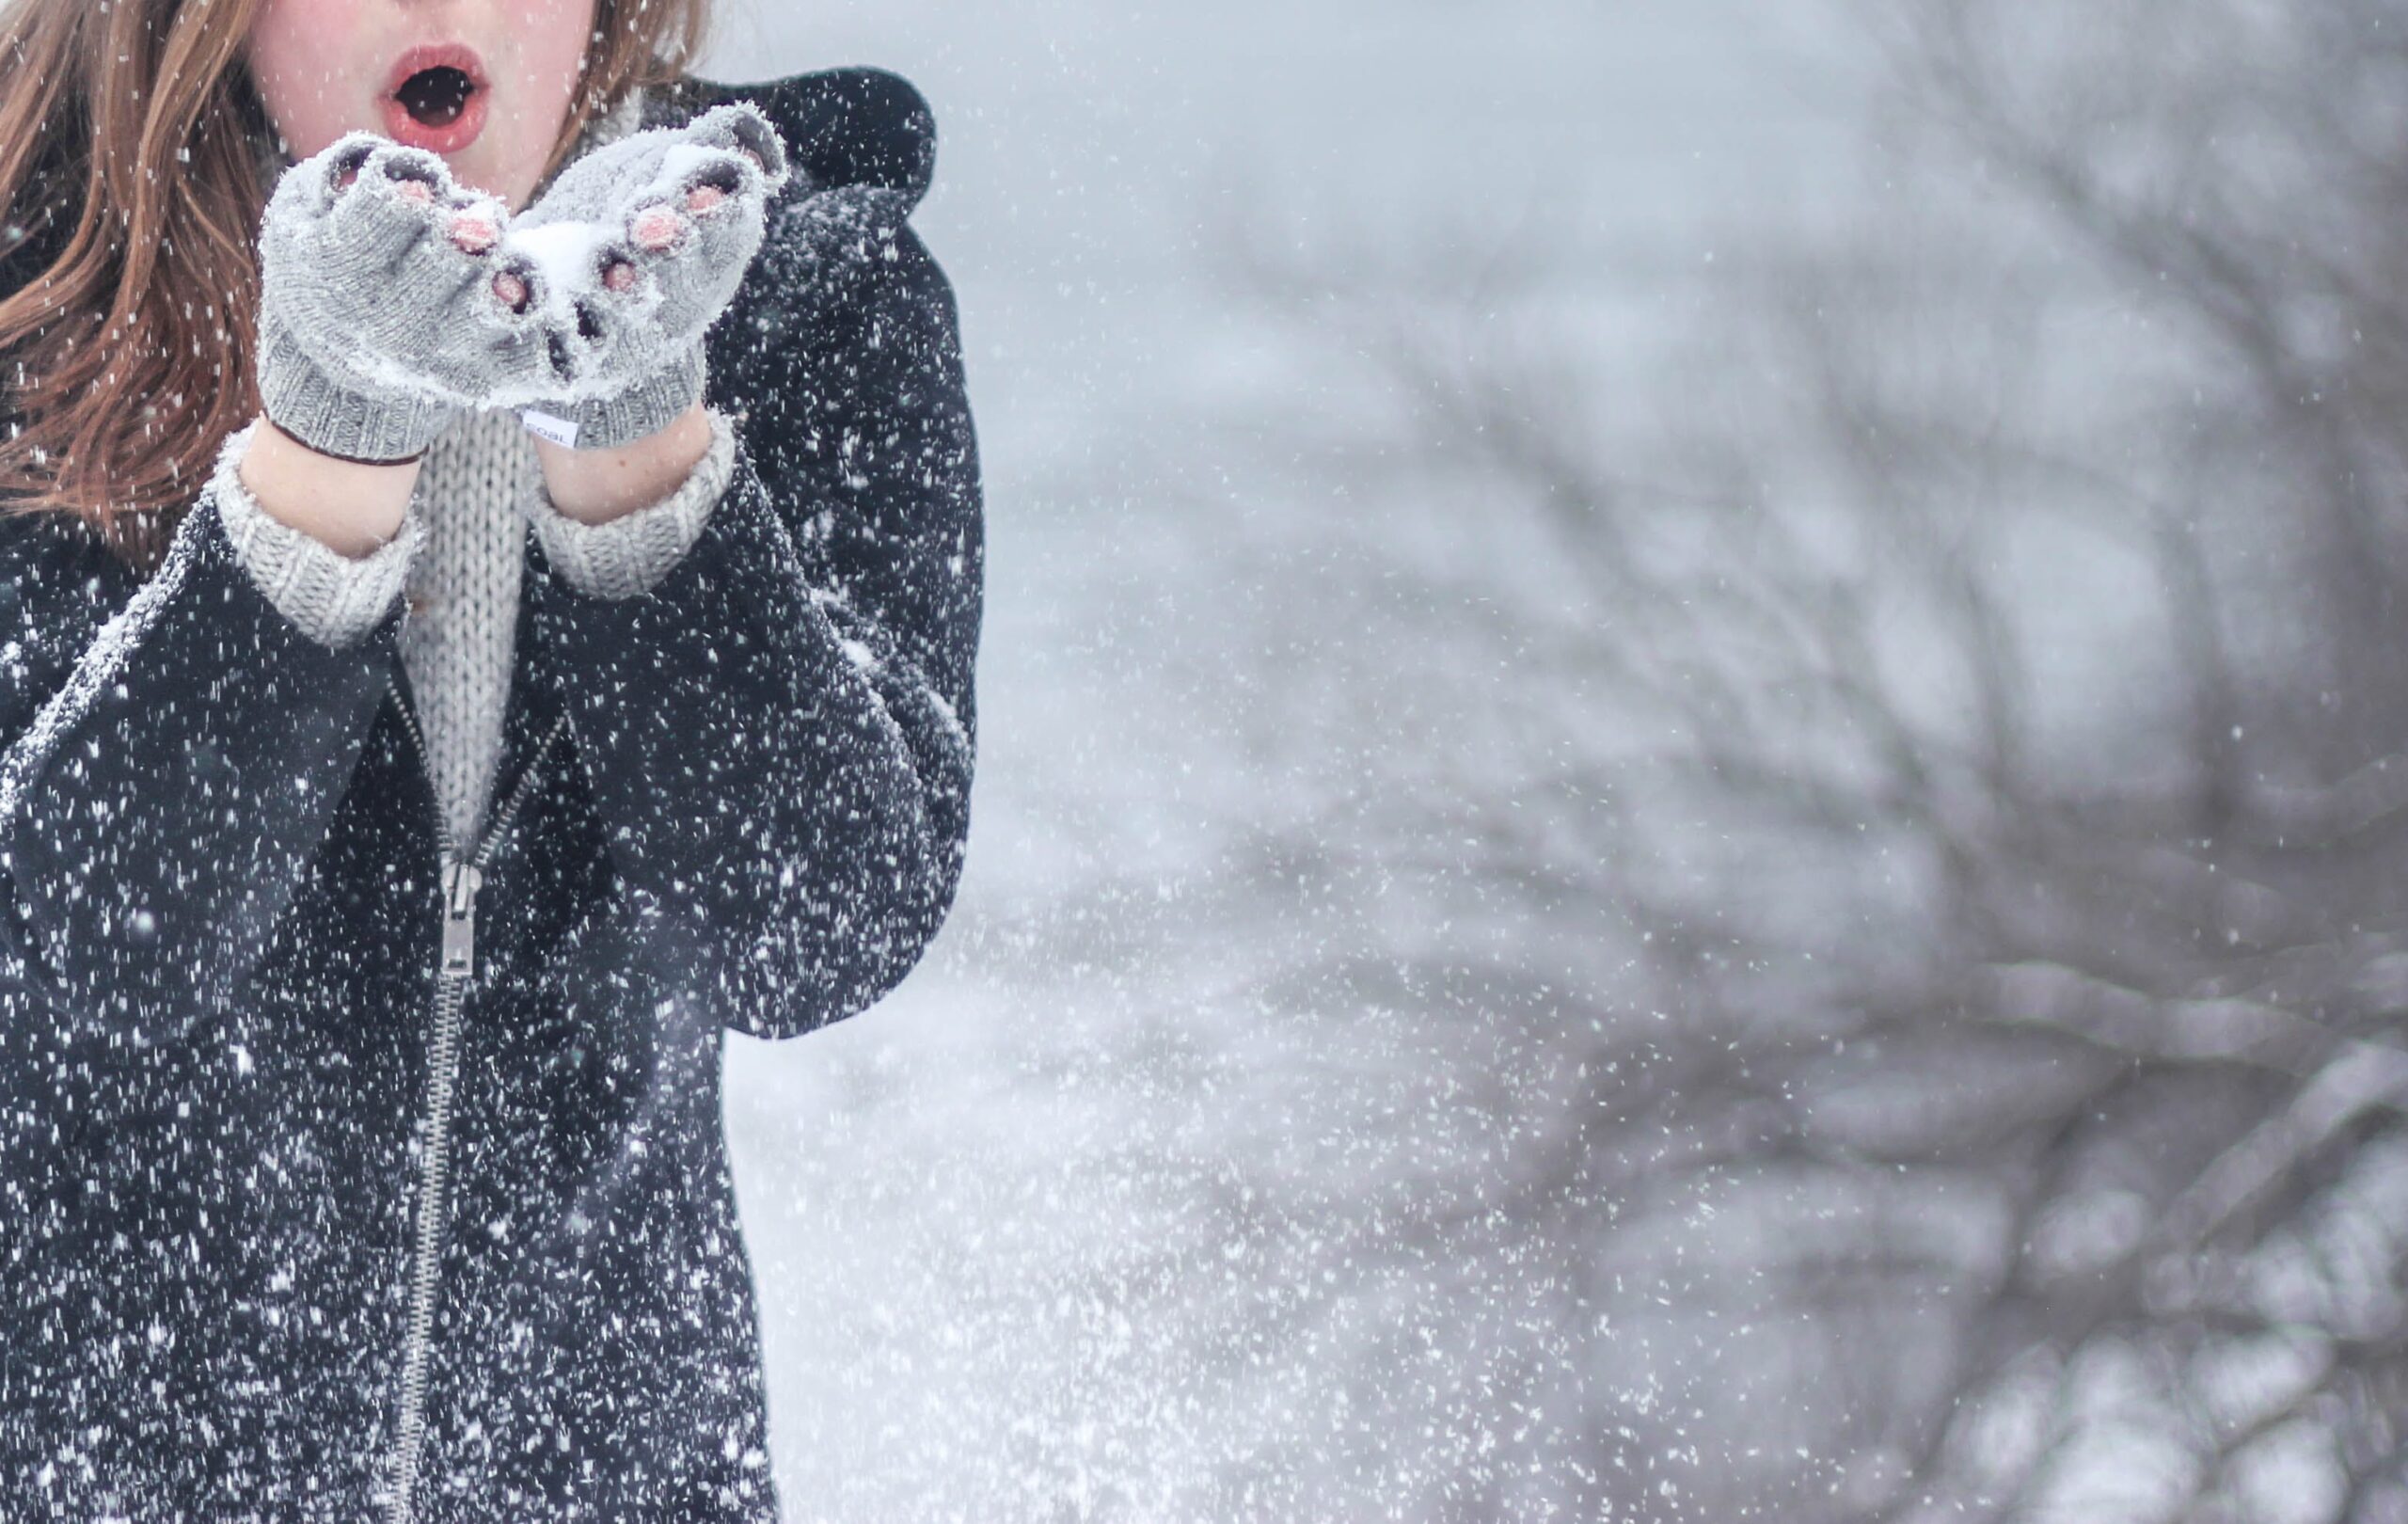 woman dressed in winter gear blowing snowflakes outdoors | winter activities Highlands Ranch